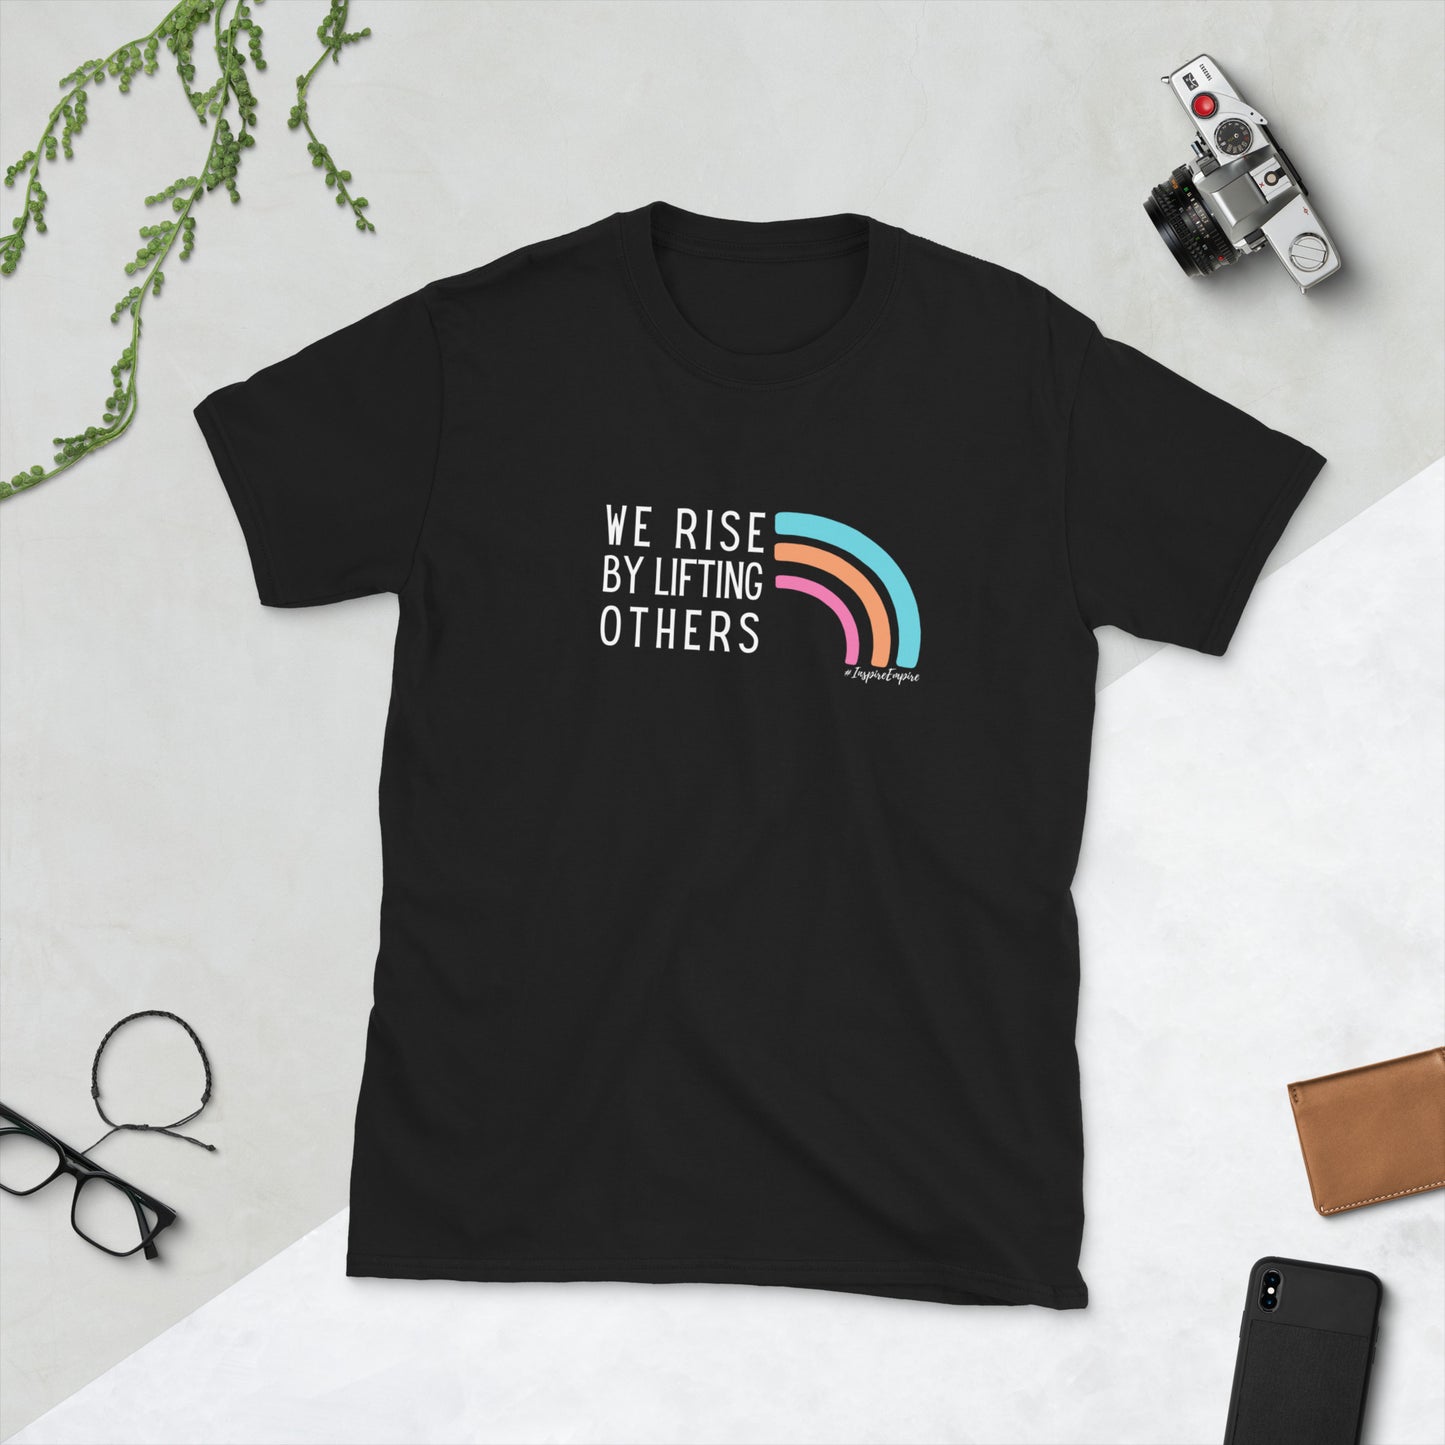 We Rise by Lifting Others t-shirt